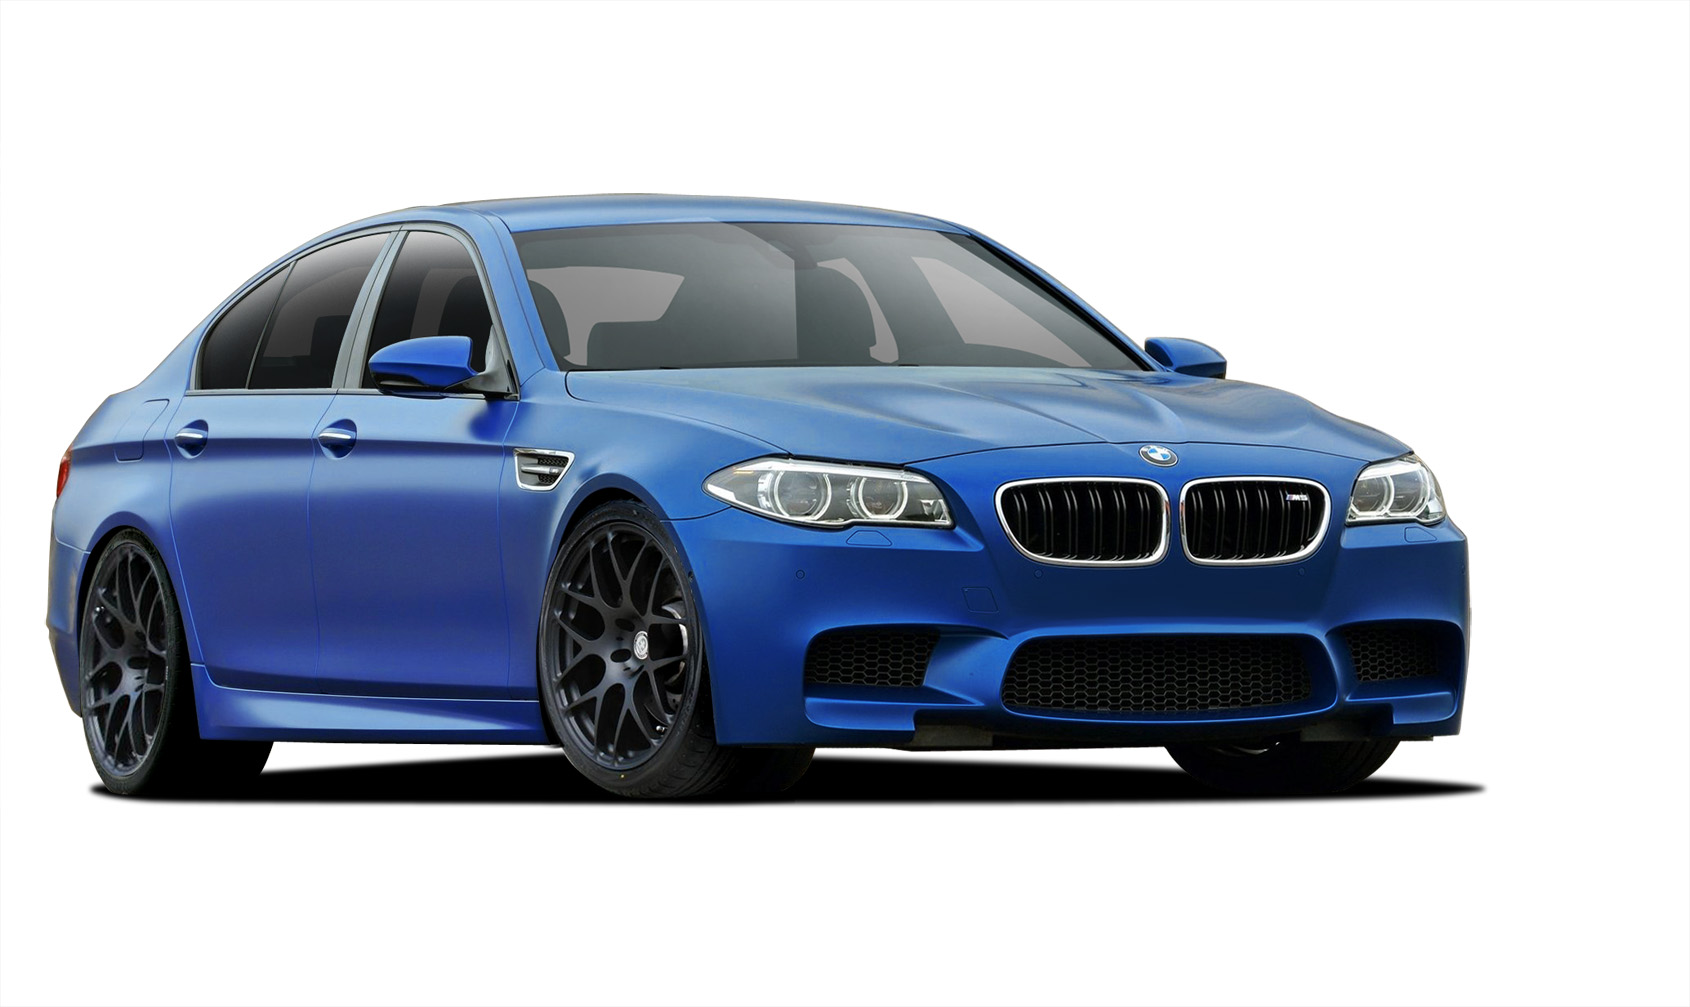 Polypropylene Body Kit Bodykit for 2016 BMW 5 Series 4DR - BMW 5 Series F10 Vaero M5 Look Conversion Kit ( with PDC , with Washer , with Camera ) - 6